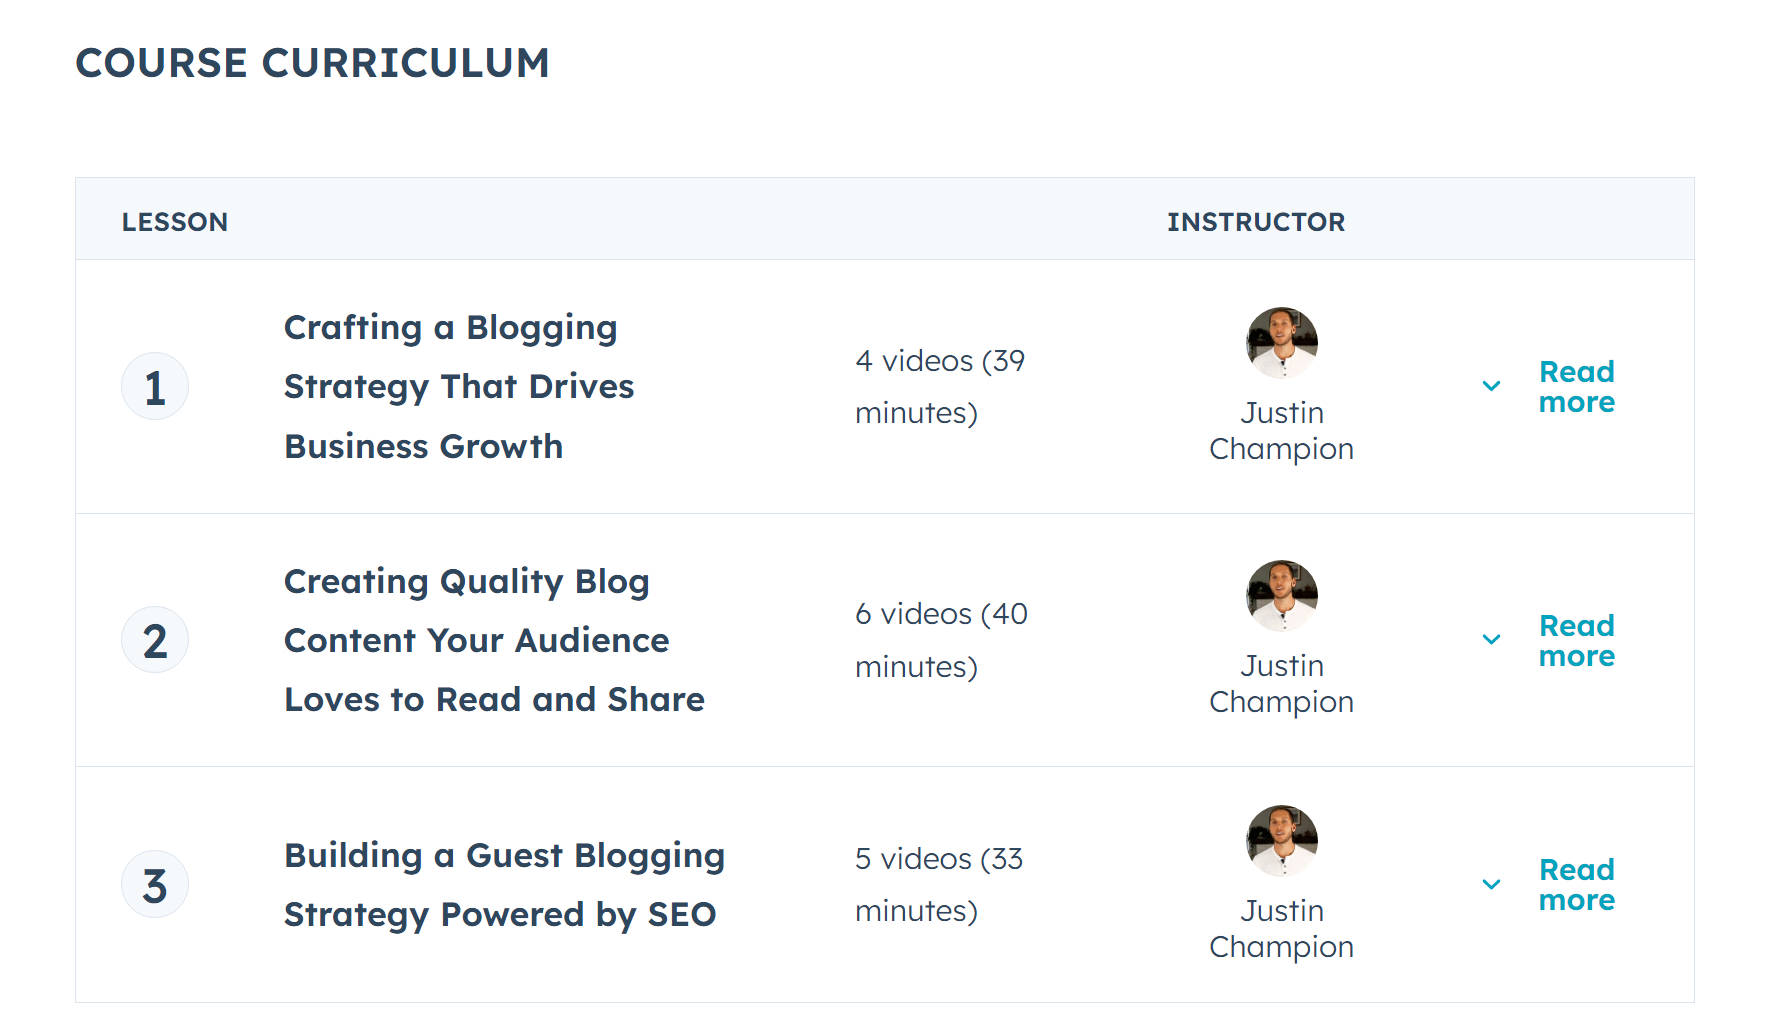 Free blogging courses for beginners: HubSpot Academy's Blogging Course